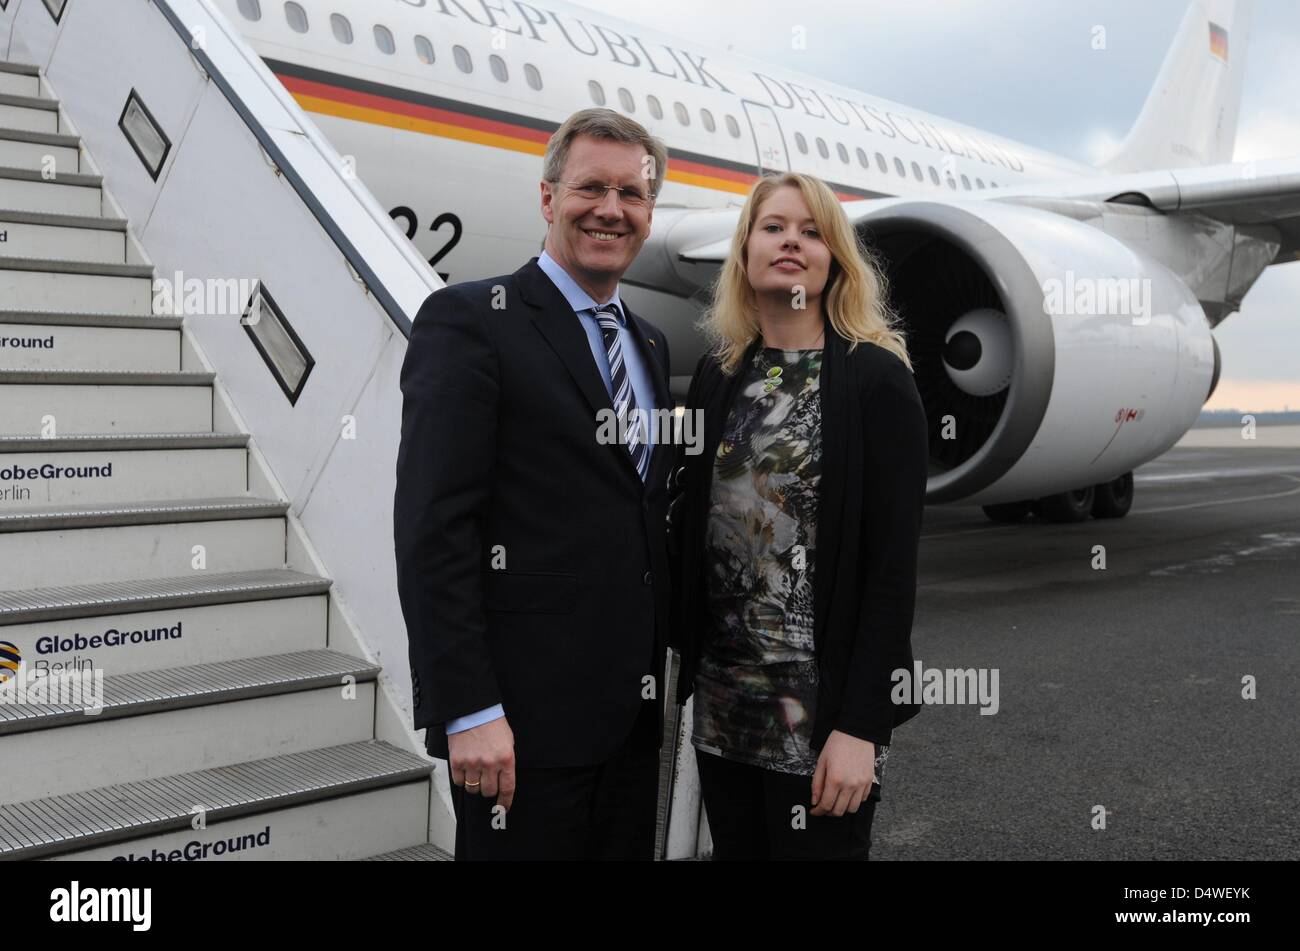 German President Christian Wulff and daughter Annalena pose for a picture before boarding a government plane bound for Israel at Tegel airport in Berlin, Germany, 27 November 2010. Wulff's 17-year-old daughter accompanies Mr Wulff on the four-day visit instead of wife Bettina. The choice of travel companion is supposed to symbolize the importance of transmitting the memory of the H Stock Photo